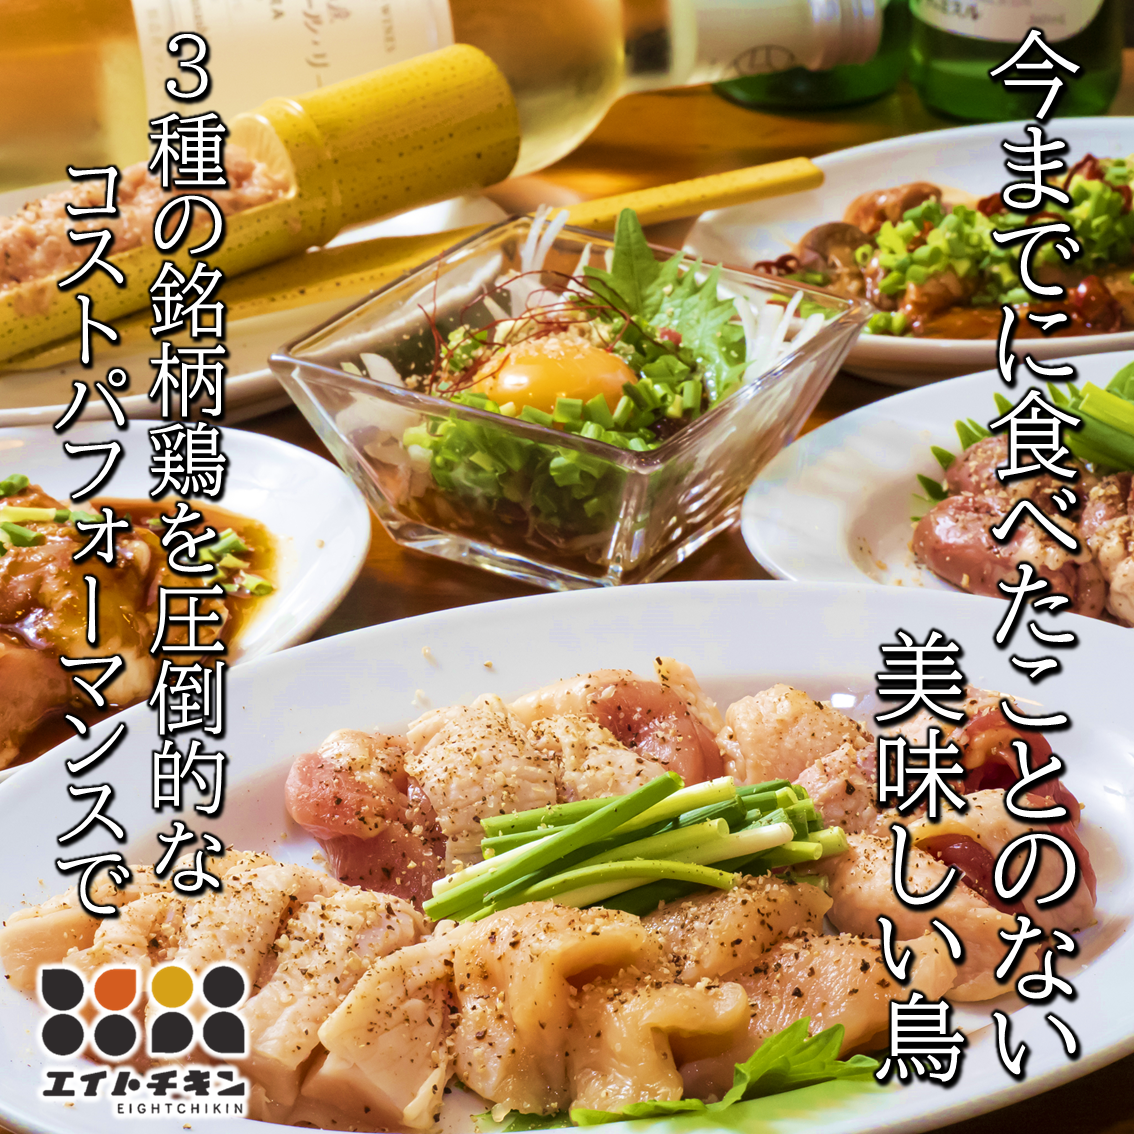 Delivering delicious food from Hyogo Prefecture ~ Bring joy to eating out ~ We offer a wide variety of chicken yakiniku and chicken dishes ♪